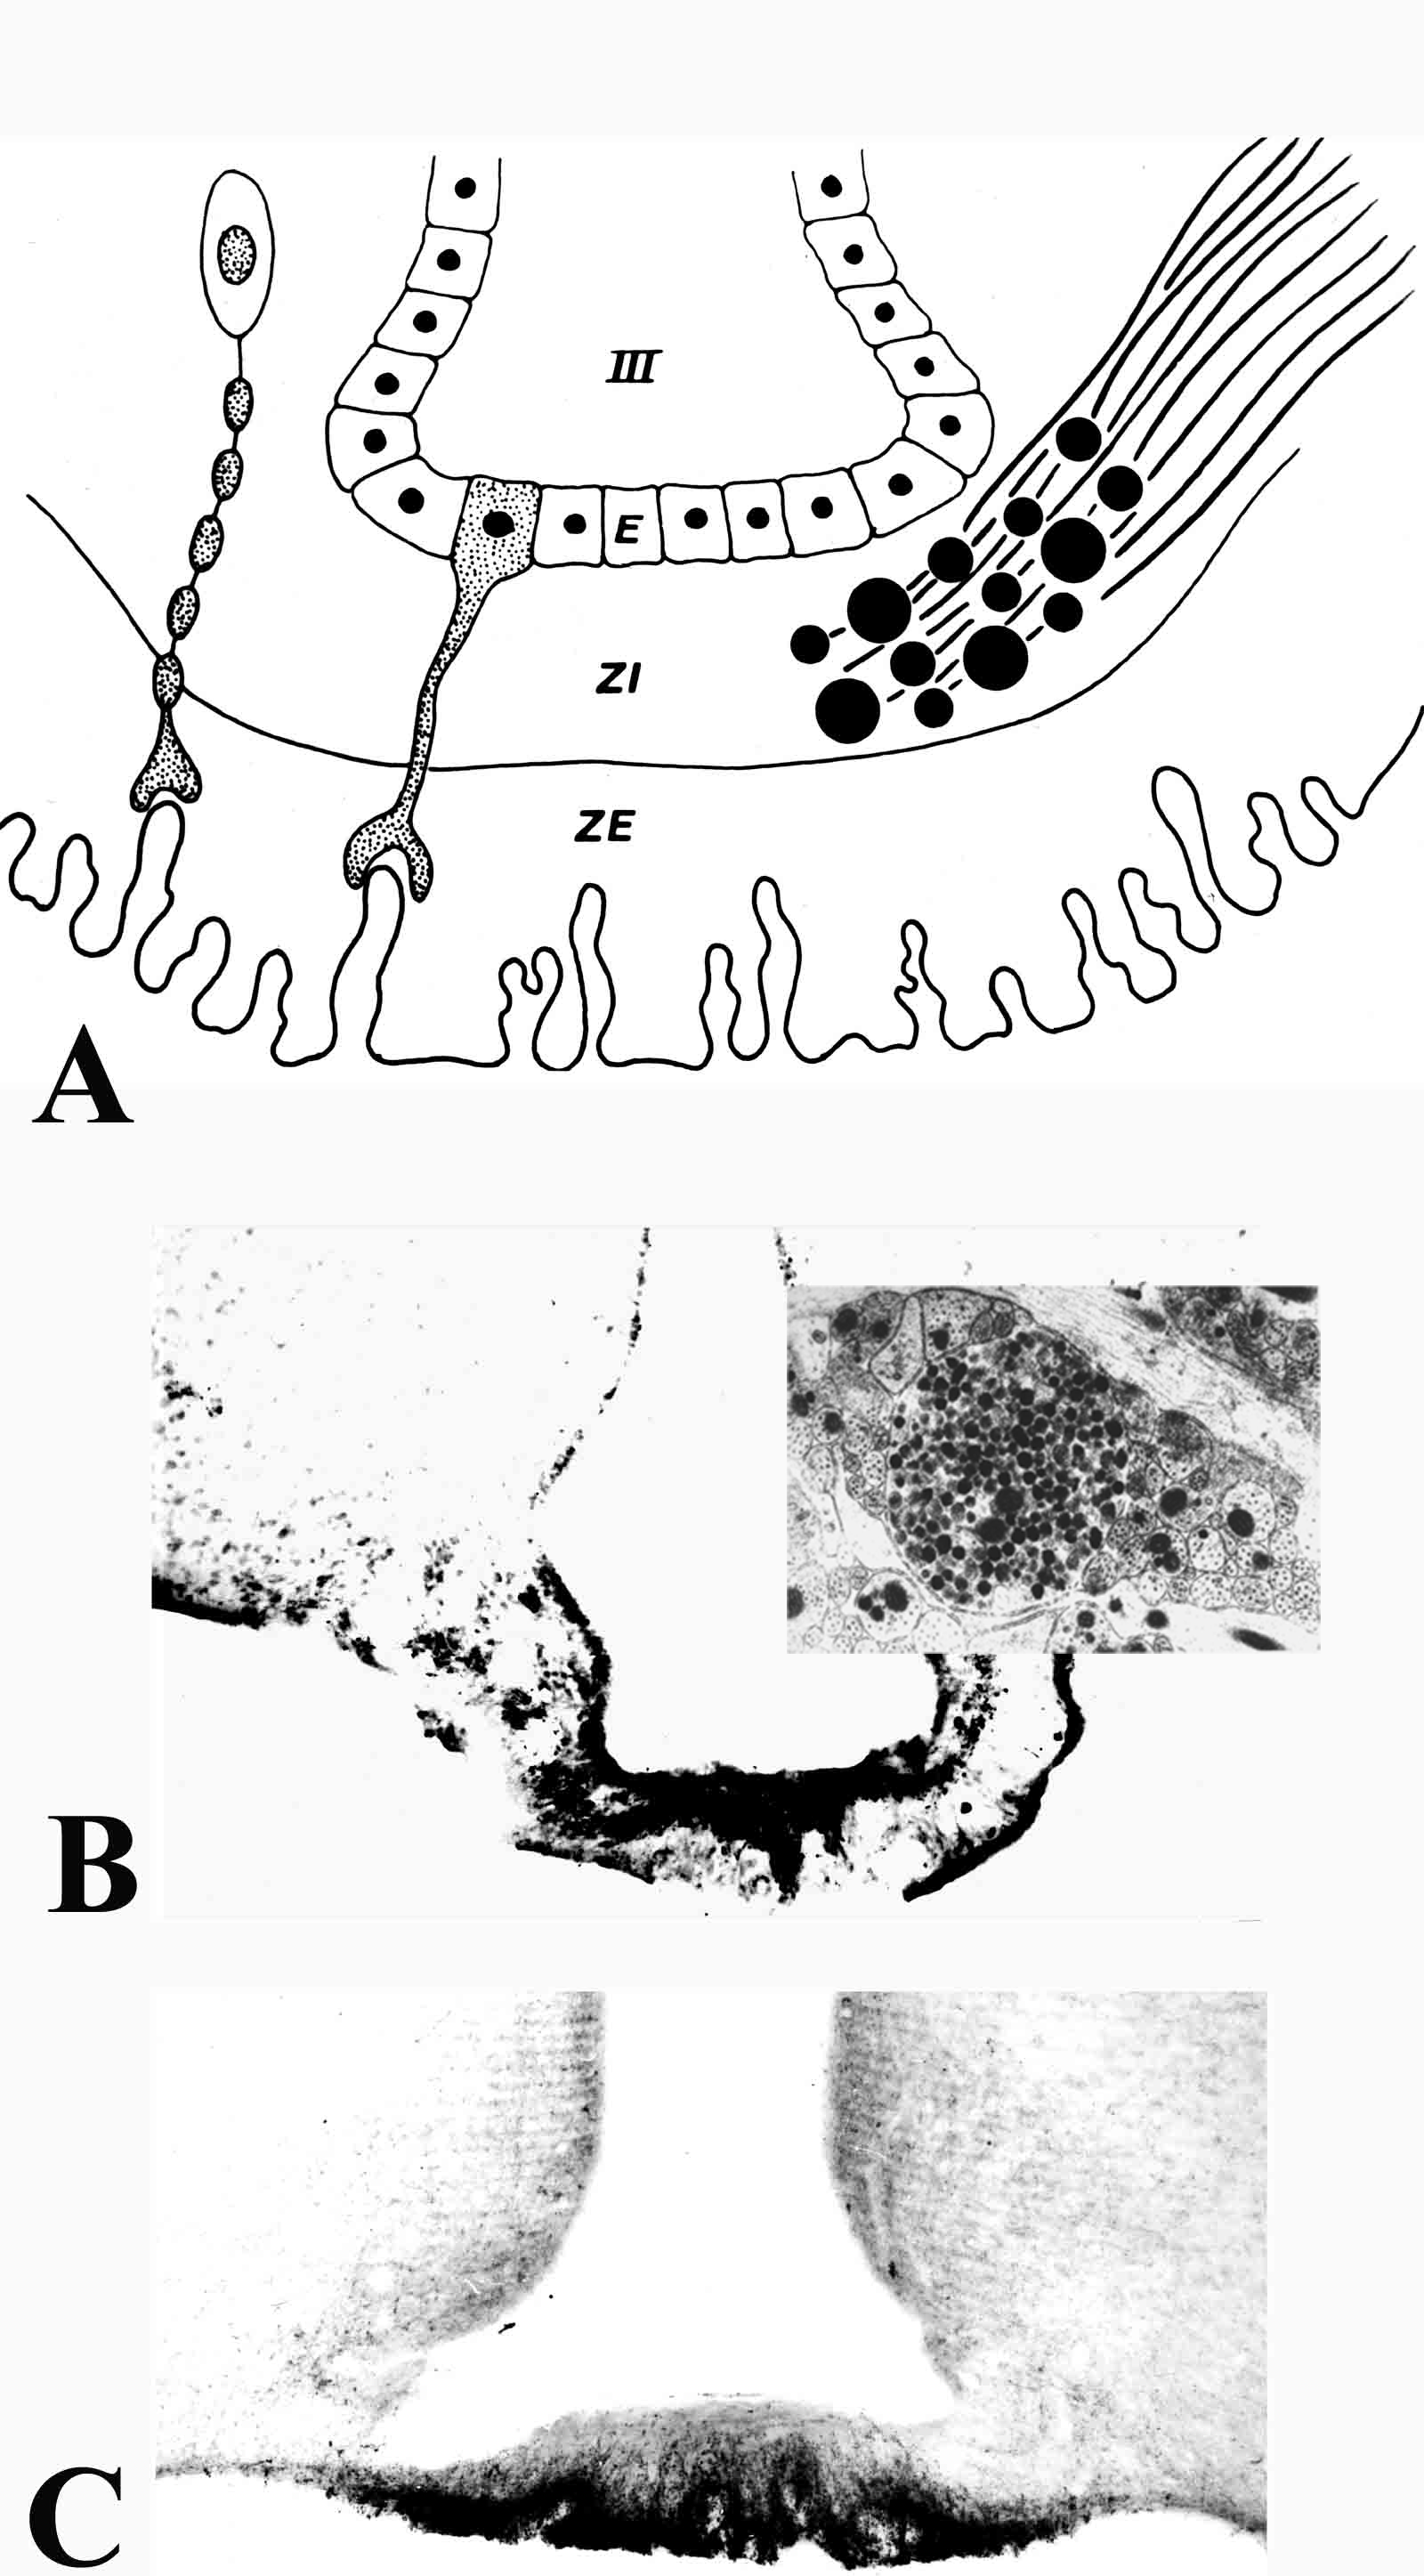 Fig. 20. (A) Schematic diagram of the median eminence showing the organization of its three major zones: ependymal zone (E), internal zone (ZI), and external zone (ZE). ZE is invigilated by portal capillaries which are contacted by axon terminals of the tuberoinfundibular system and by processes of specialized ependymal cells, the tanycytes. (B) Fibers coursing through the ZI are seen immunocytochemically in the rat using antiserum to vasporessin. (C) Fibers terminating in the ZE in close association to portal capillaries (PC) are seen immunocytochemically in the rat using a proTRH-directed antiserum. III = third ventricle. (From Lechan RM, Functional Microanatomy of the Hypophysial-Pituitary Axis, in Melmed, S (Ed), Oncogenesis and Molecular Biology of Pituitary Tumors, Frontiers of Hormone Research, 20: 2-40, 1996.)